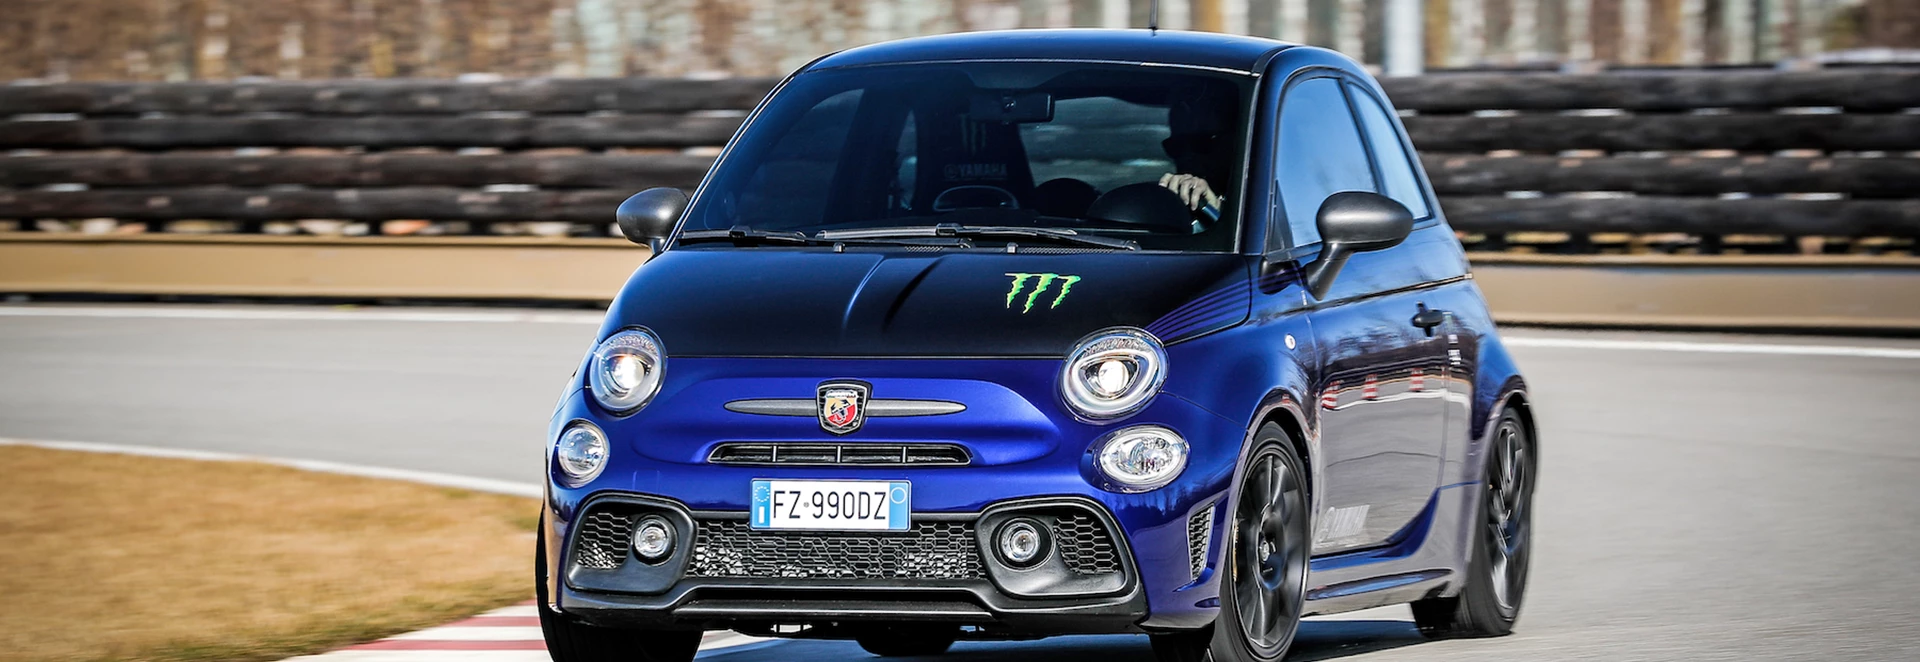 New Abarth 595 special editions: Here’s what you need to know 